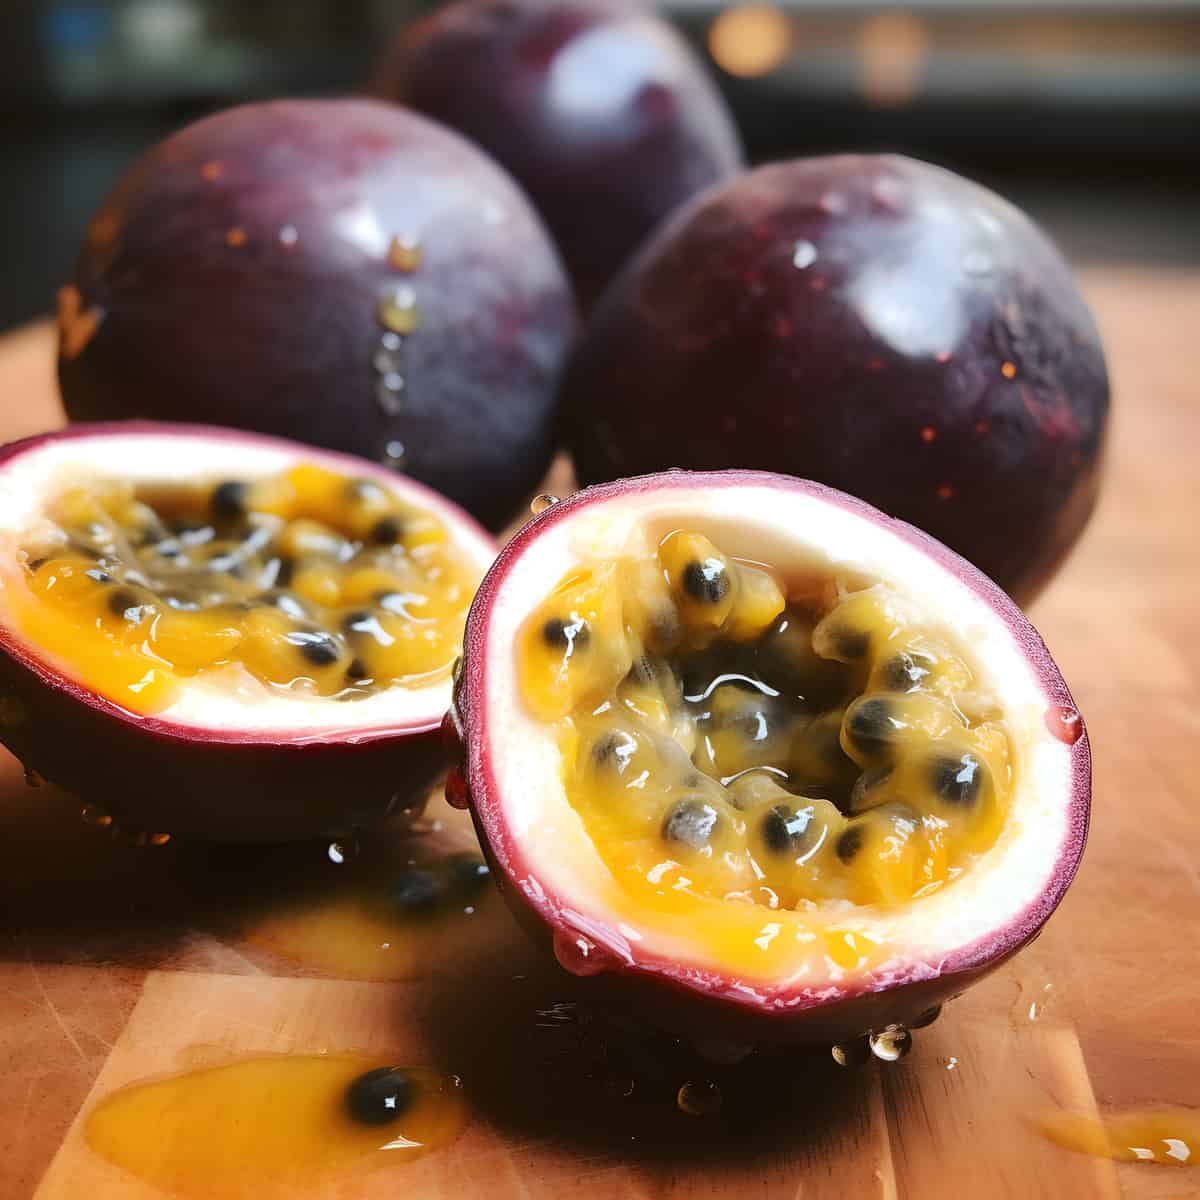 Stinking Passionfruit on a kitchen counter